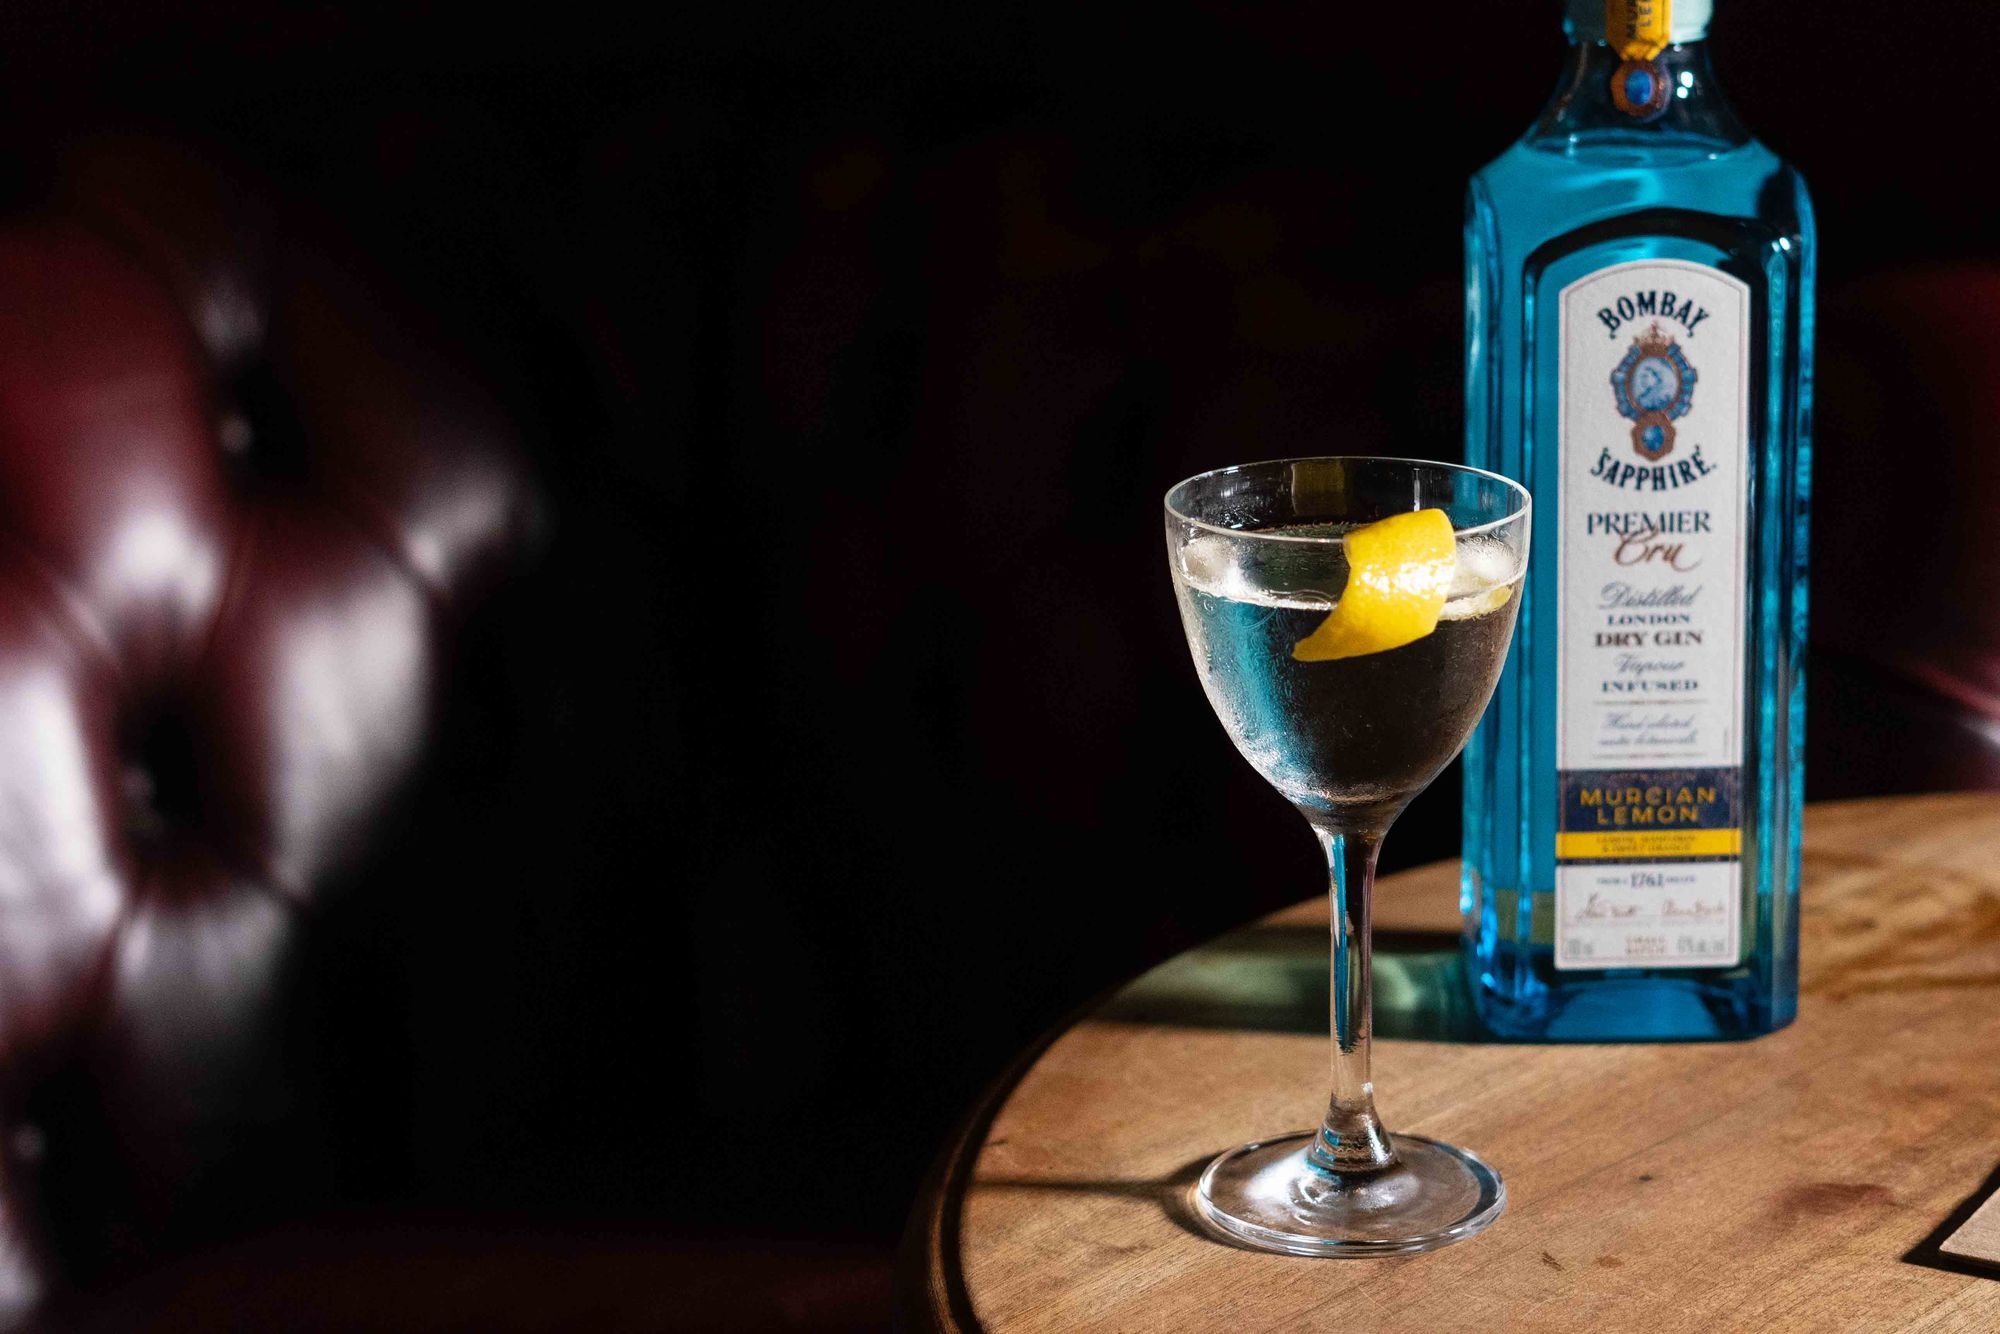 The Martini made with Bombay Sapphire Premier Cru. Photo: Boothby